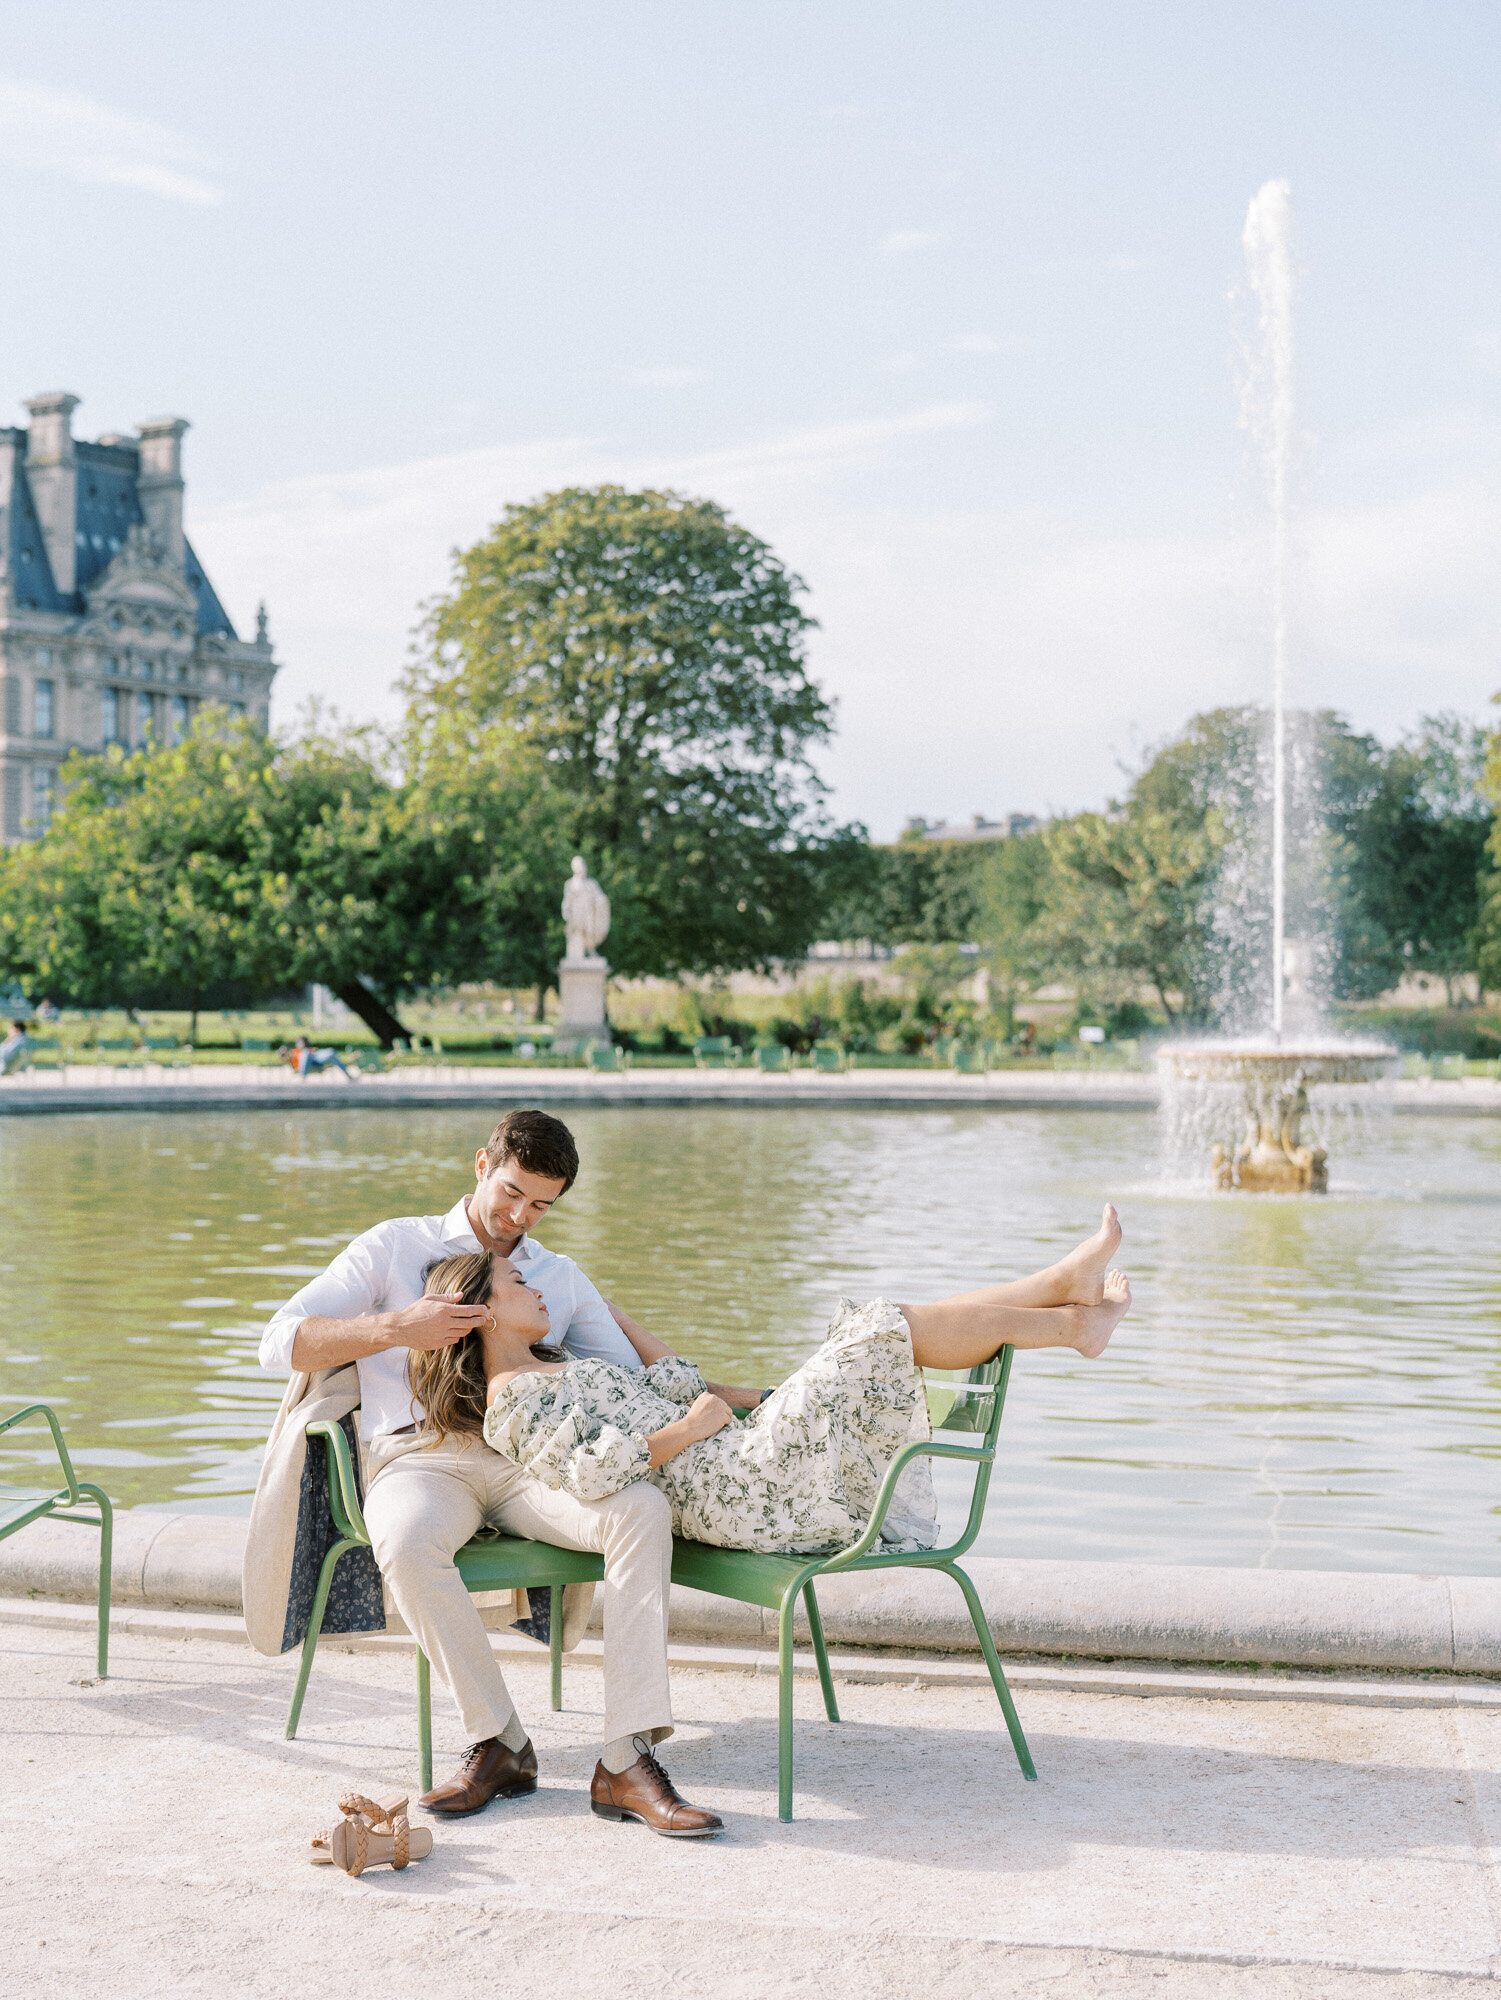 Christine & Kyle Paris Photosession by Tatyana Chaiko photographer in France-164